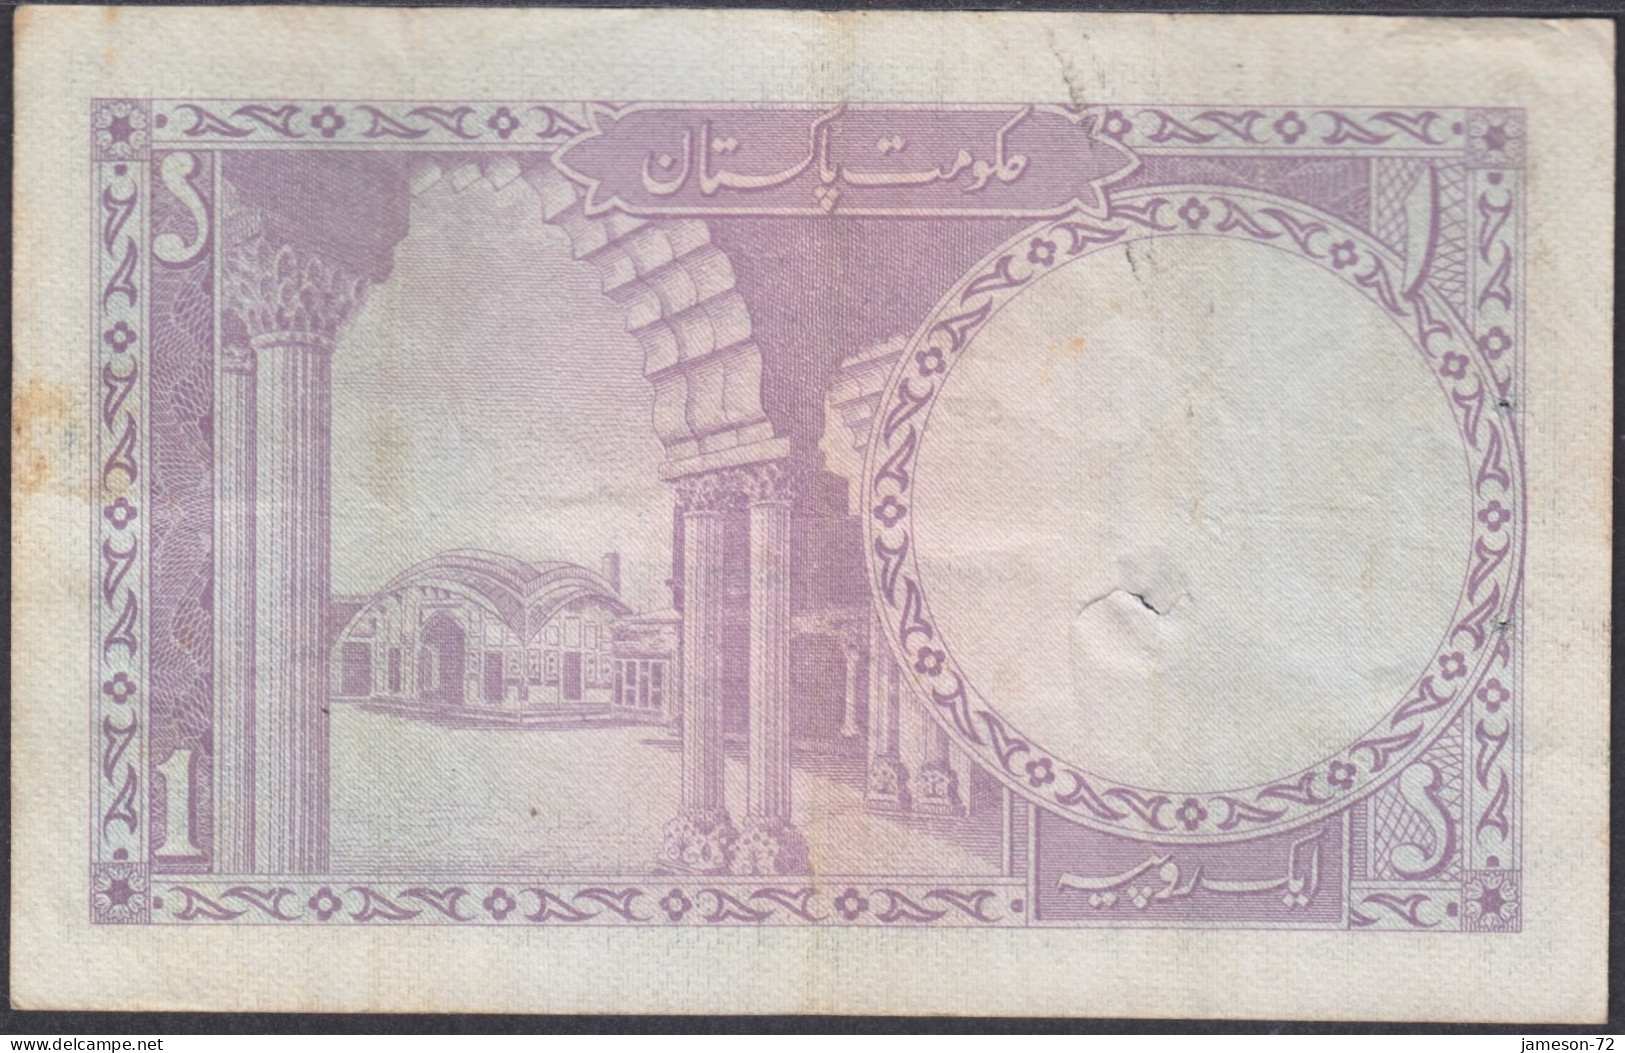 PAKISTAN - 1 Rupee ND (1964) Signature 8 P# 9A Asia Banknote - Edelweiss Coins - Pakistan